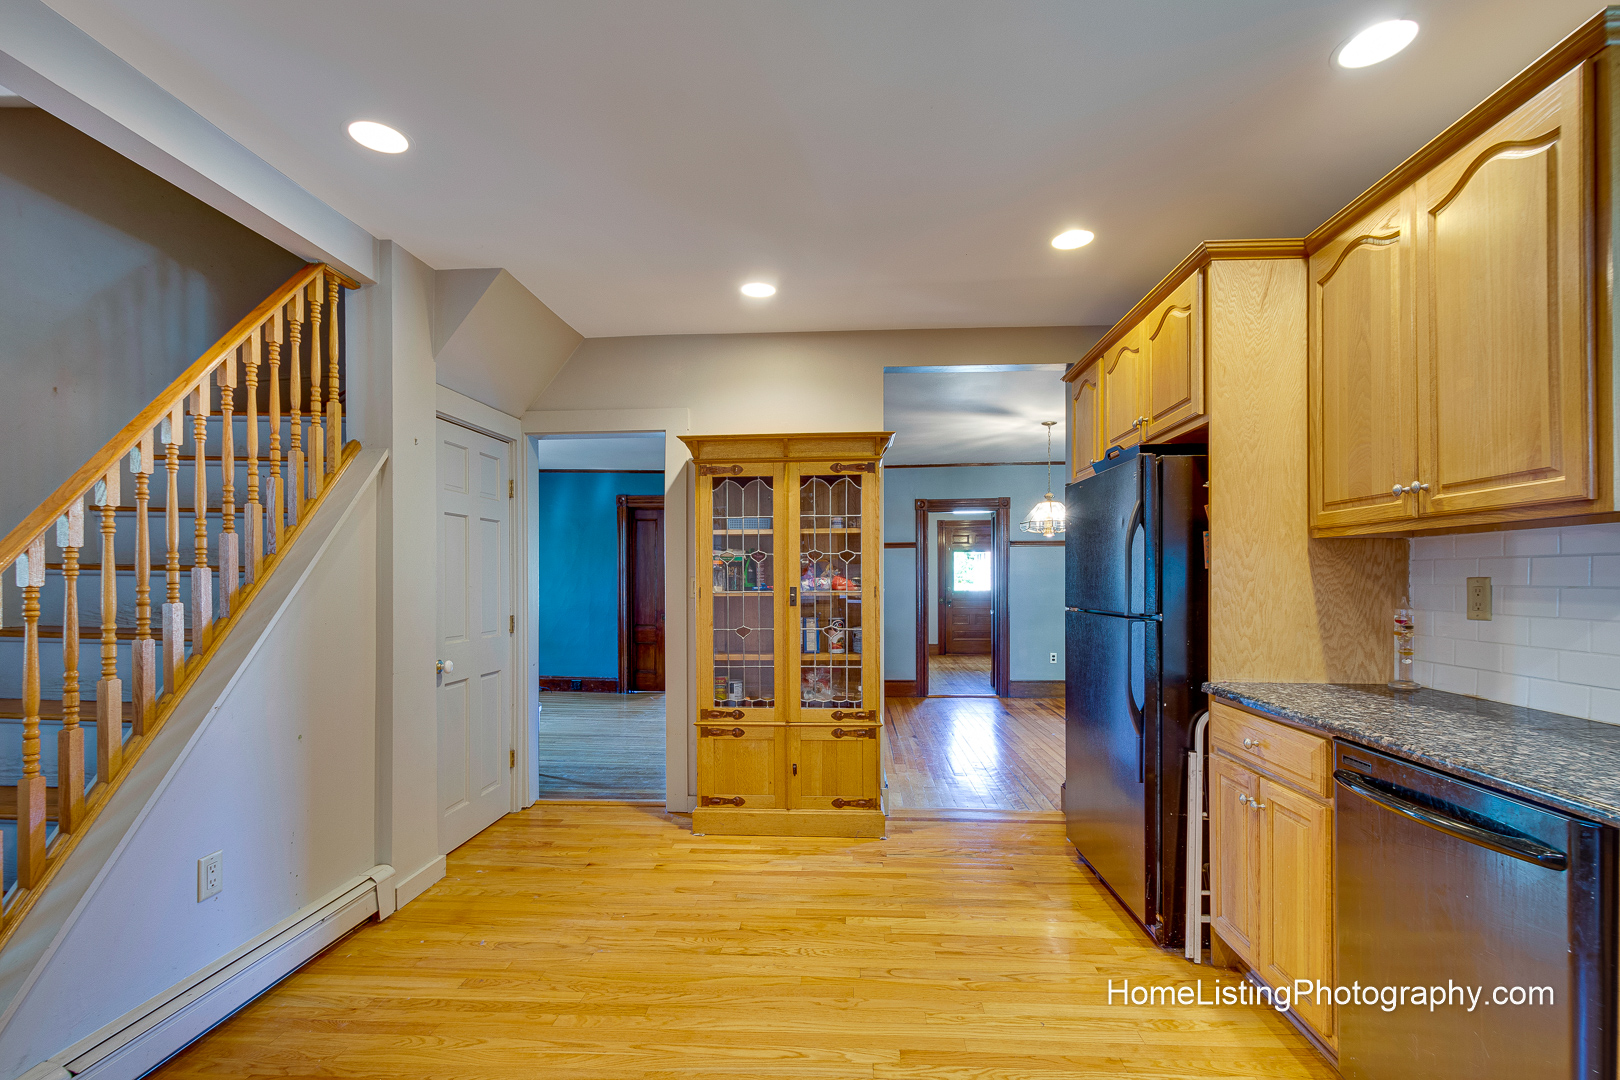 Thomas Adach - Woburn, MA professional real estate photographer - 508-655-2225 Home Listing Photography